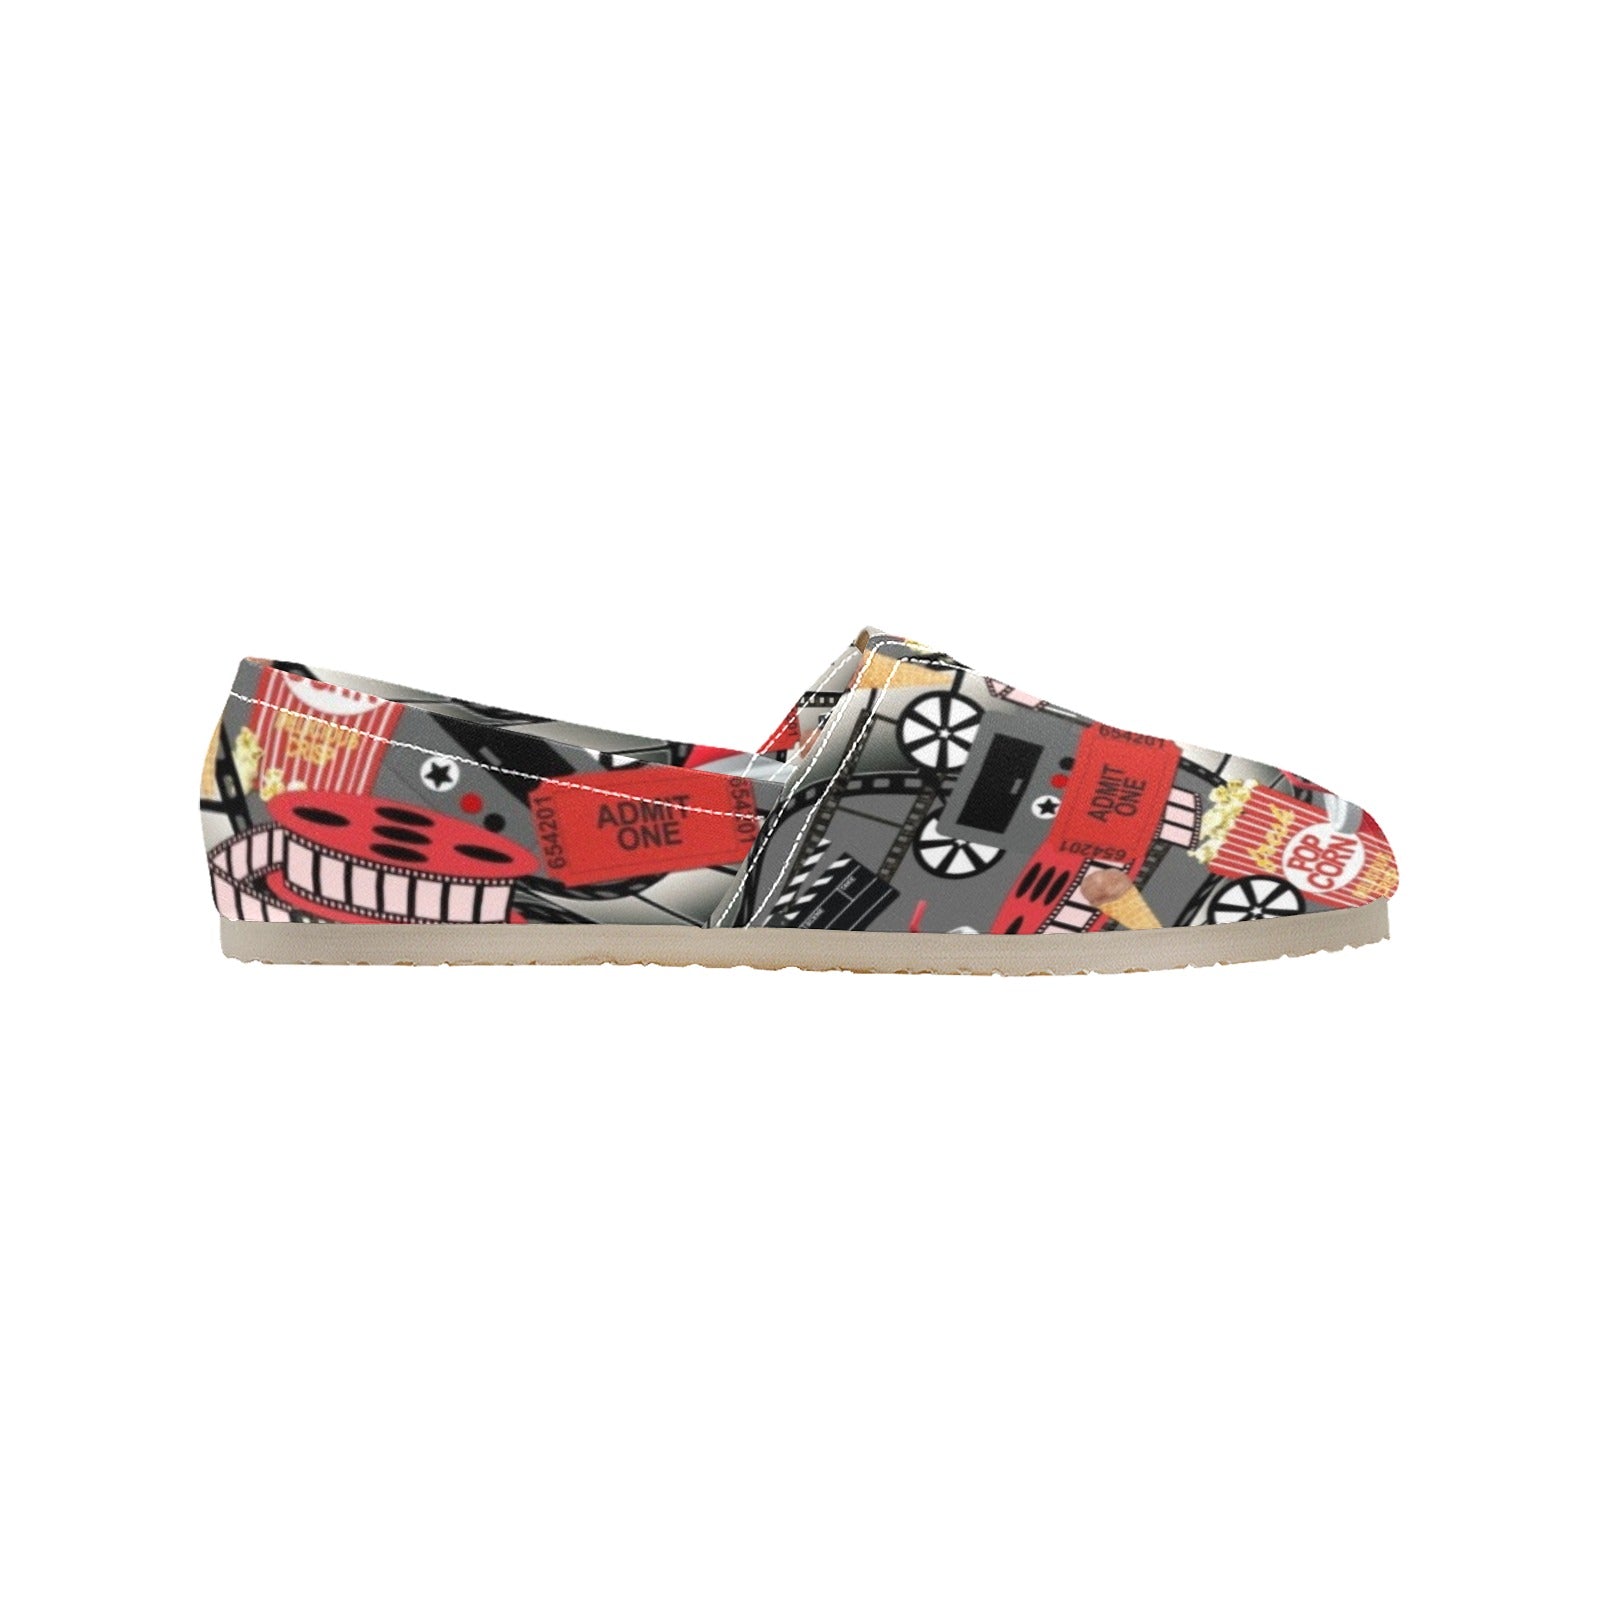 Movies - Casual Canvas Slip-on Shoes